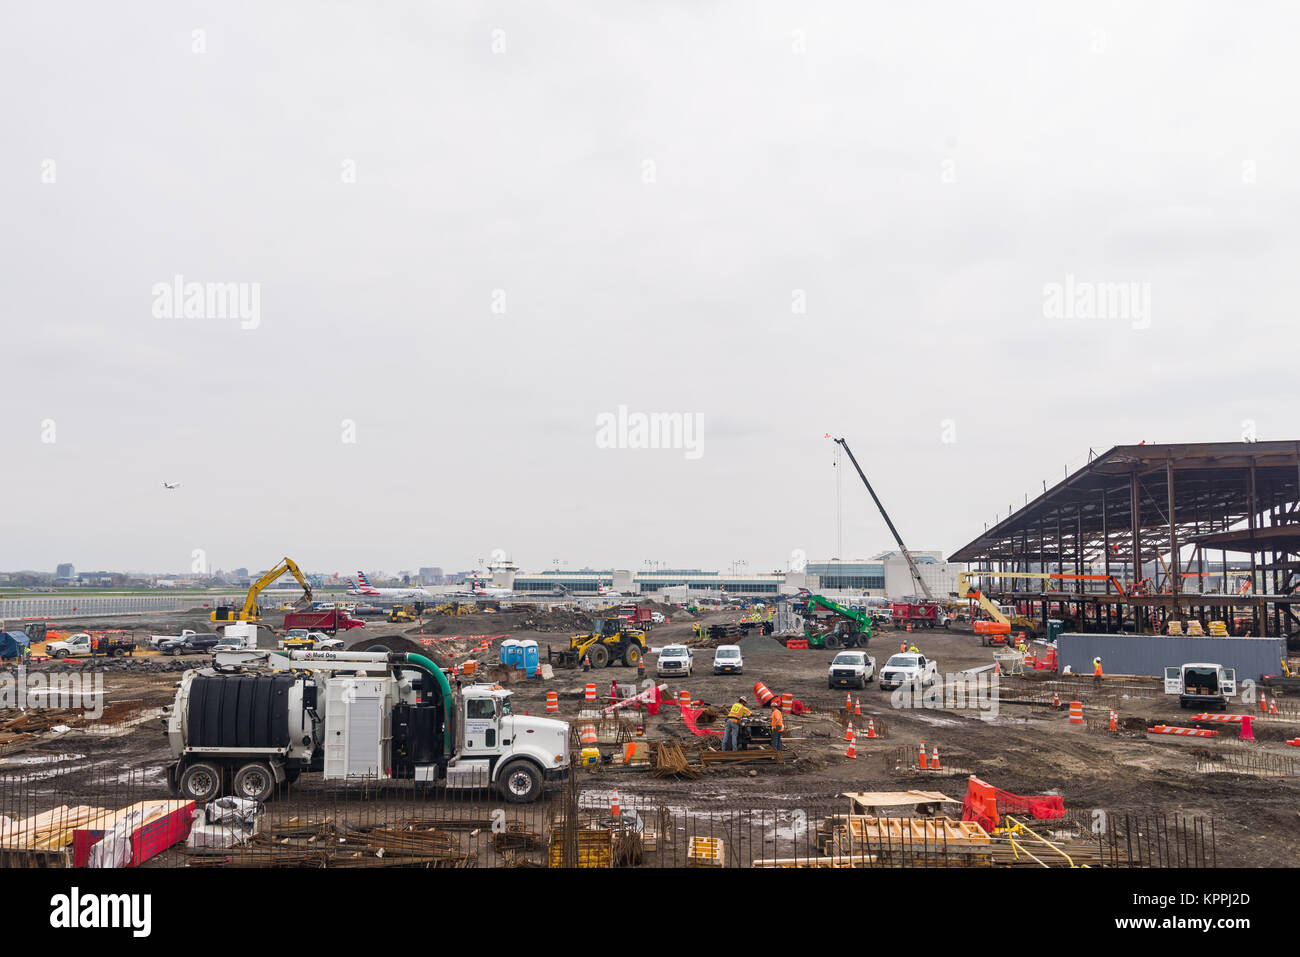 Construction equipment and workers building the new terminal at La Guardia airport in Queens, New York, USA Stock Photo